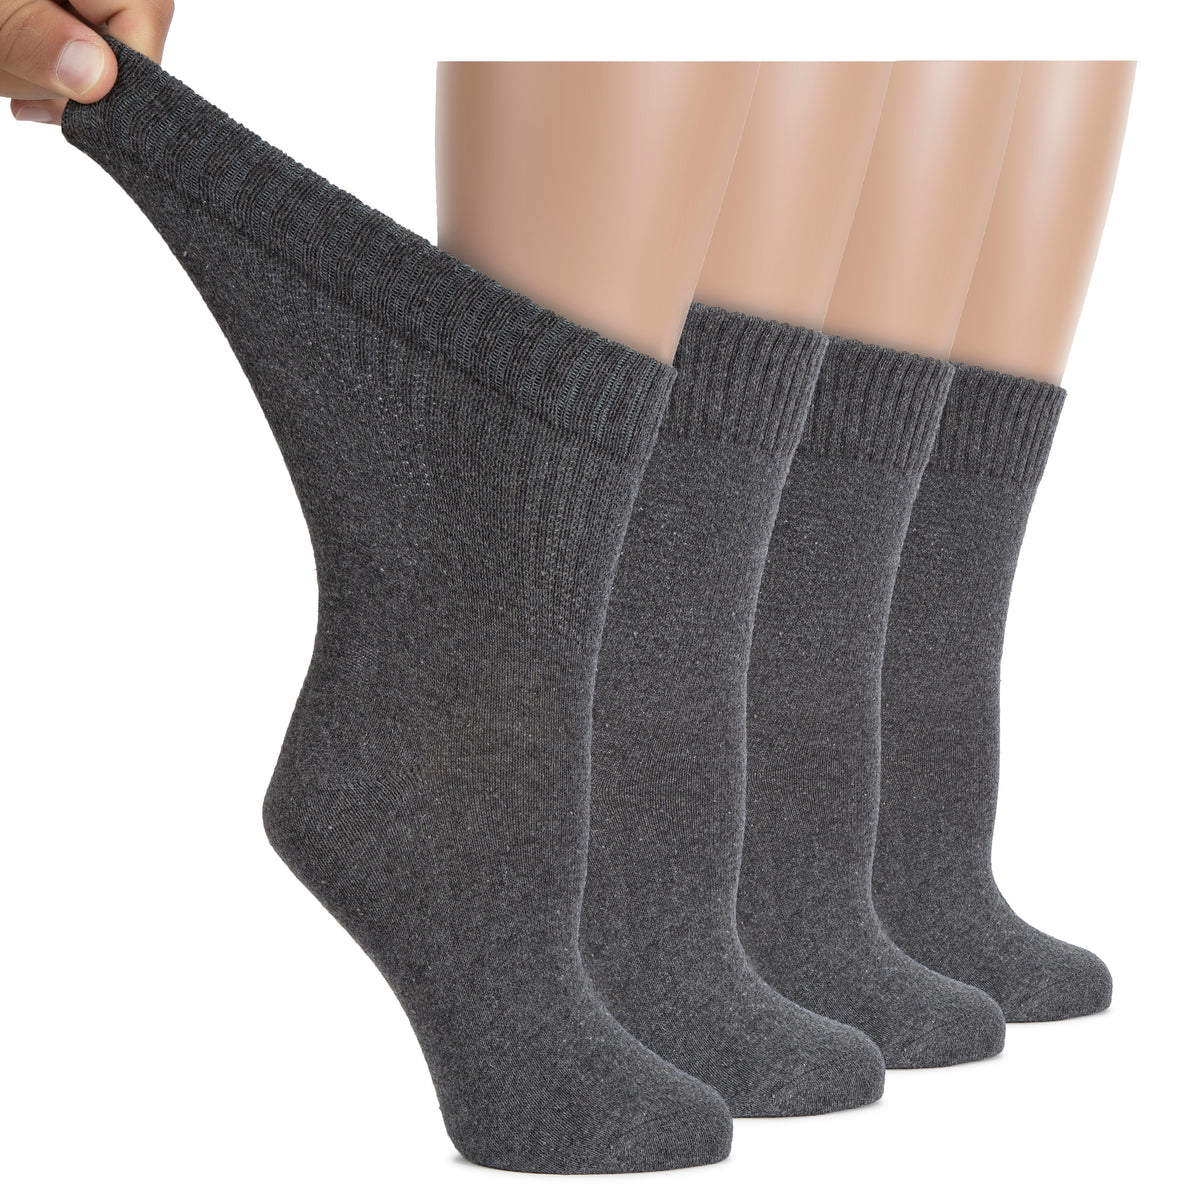 Two pairs of Women's Diabetic Cotton Crew Socks are displayed in the image, with one leg in the air, designed to provide comfort and support for women with diabetes.